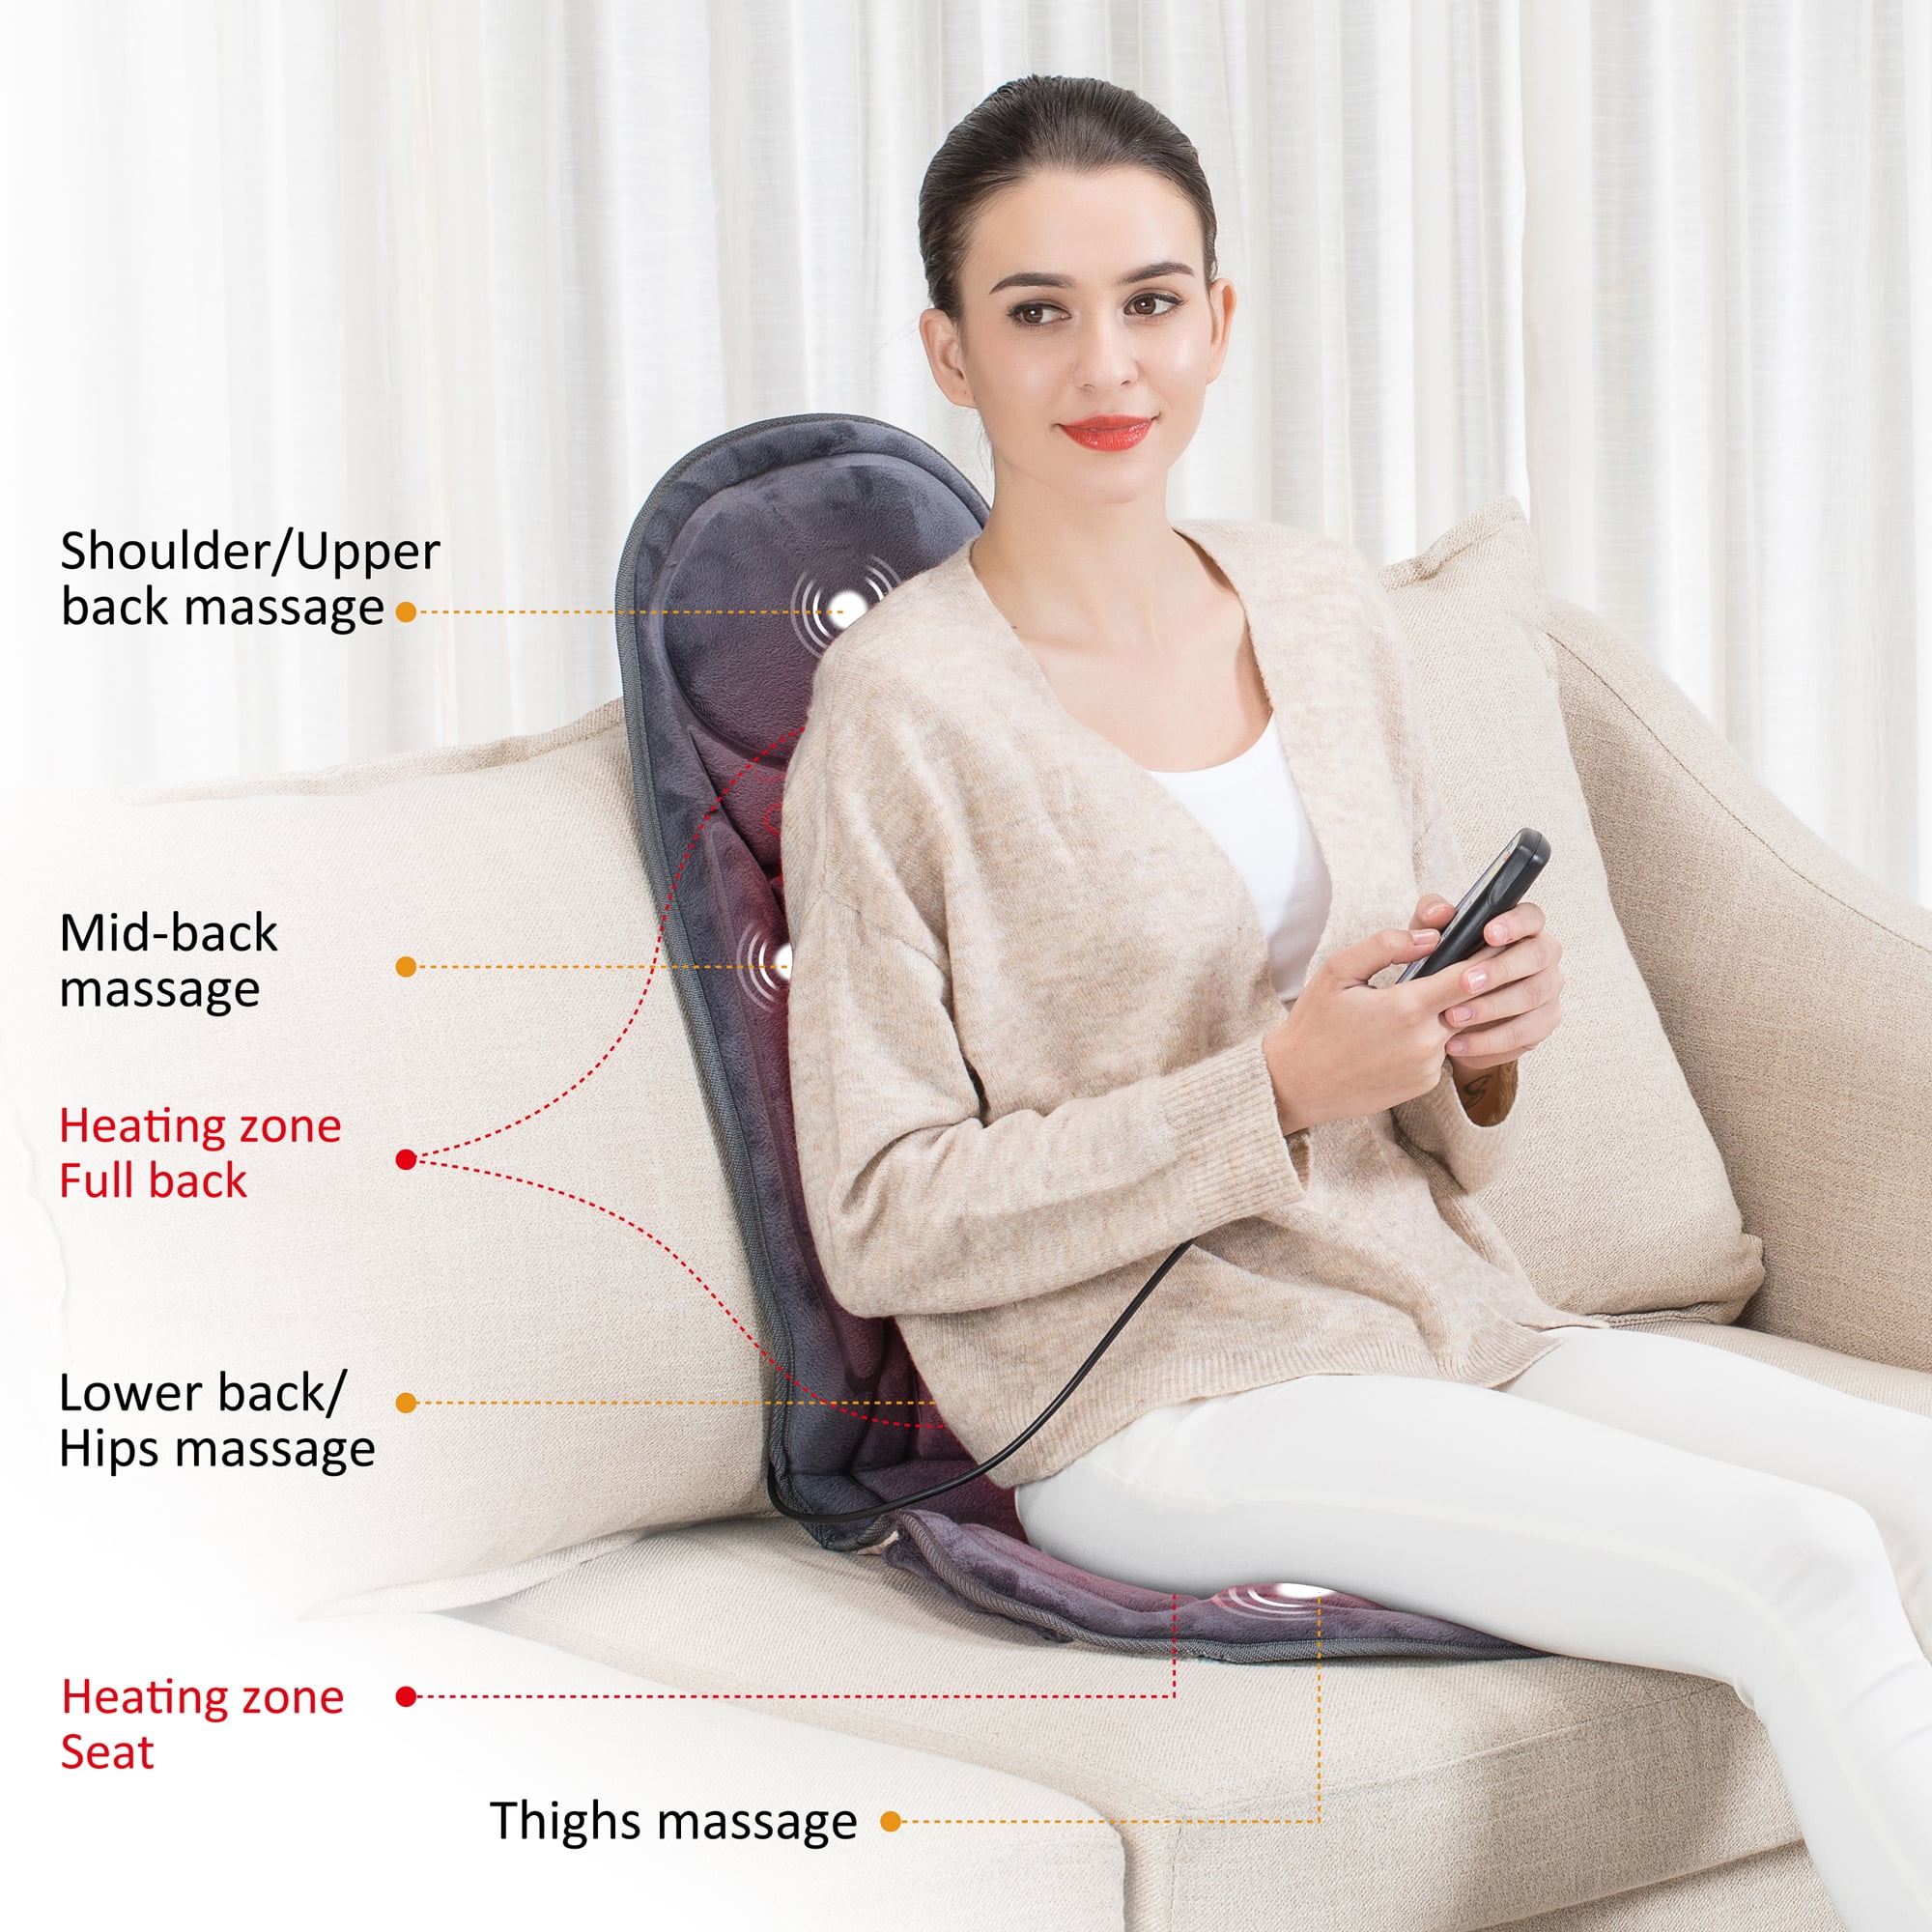 Snailax Lumbar Support Pillow with Heat and Vibration for Office Chair and Car SL-153